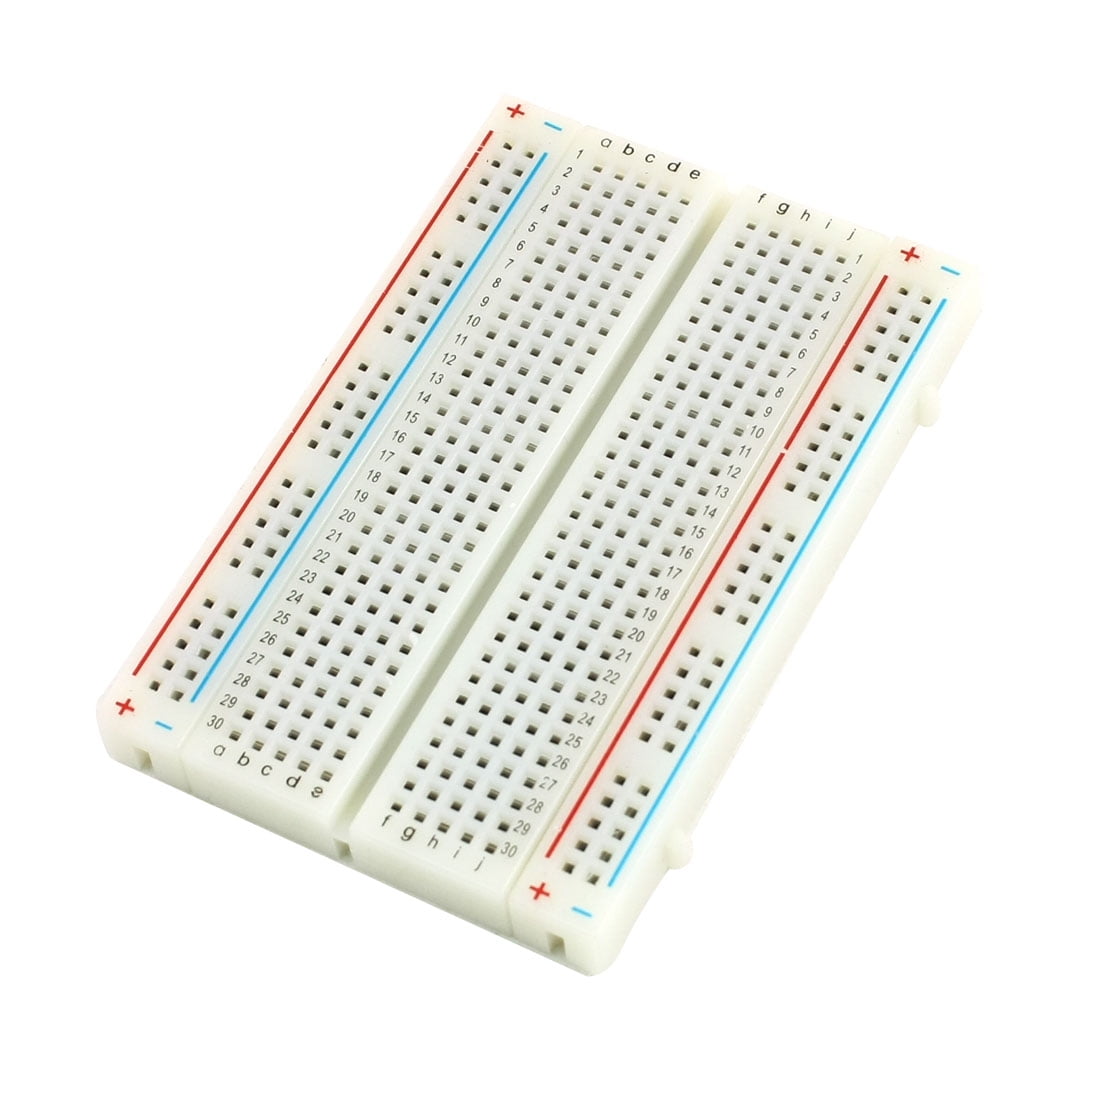 Buy Breadboard with cheap price